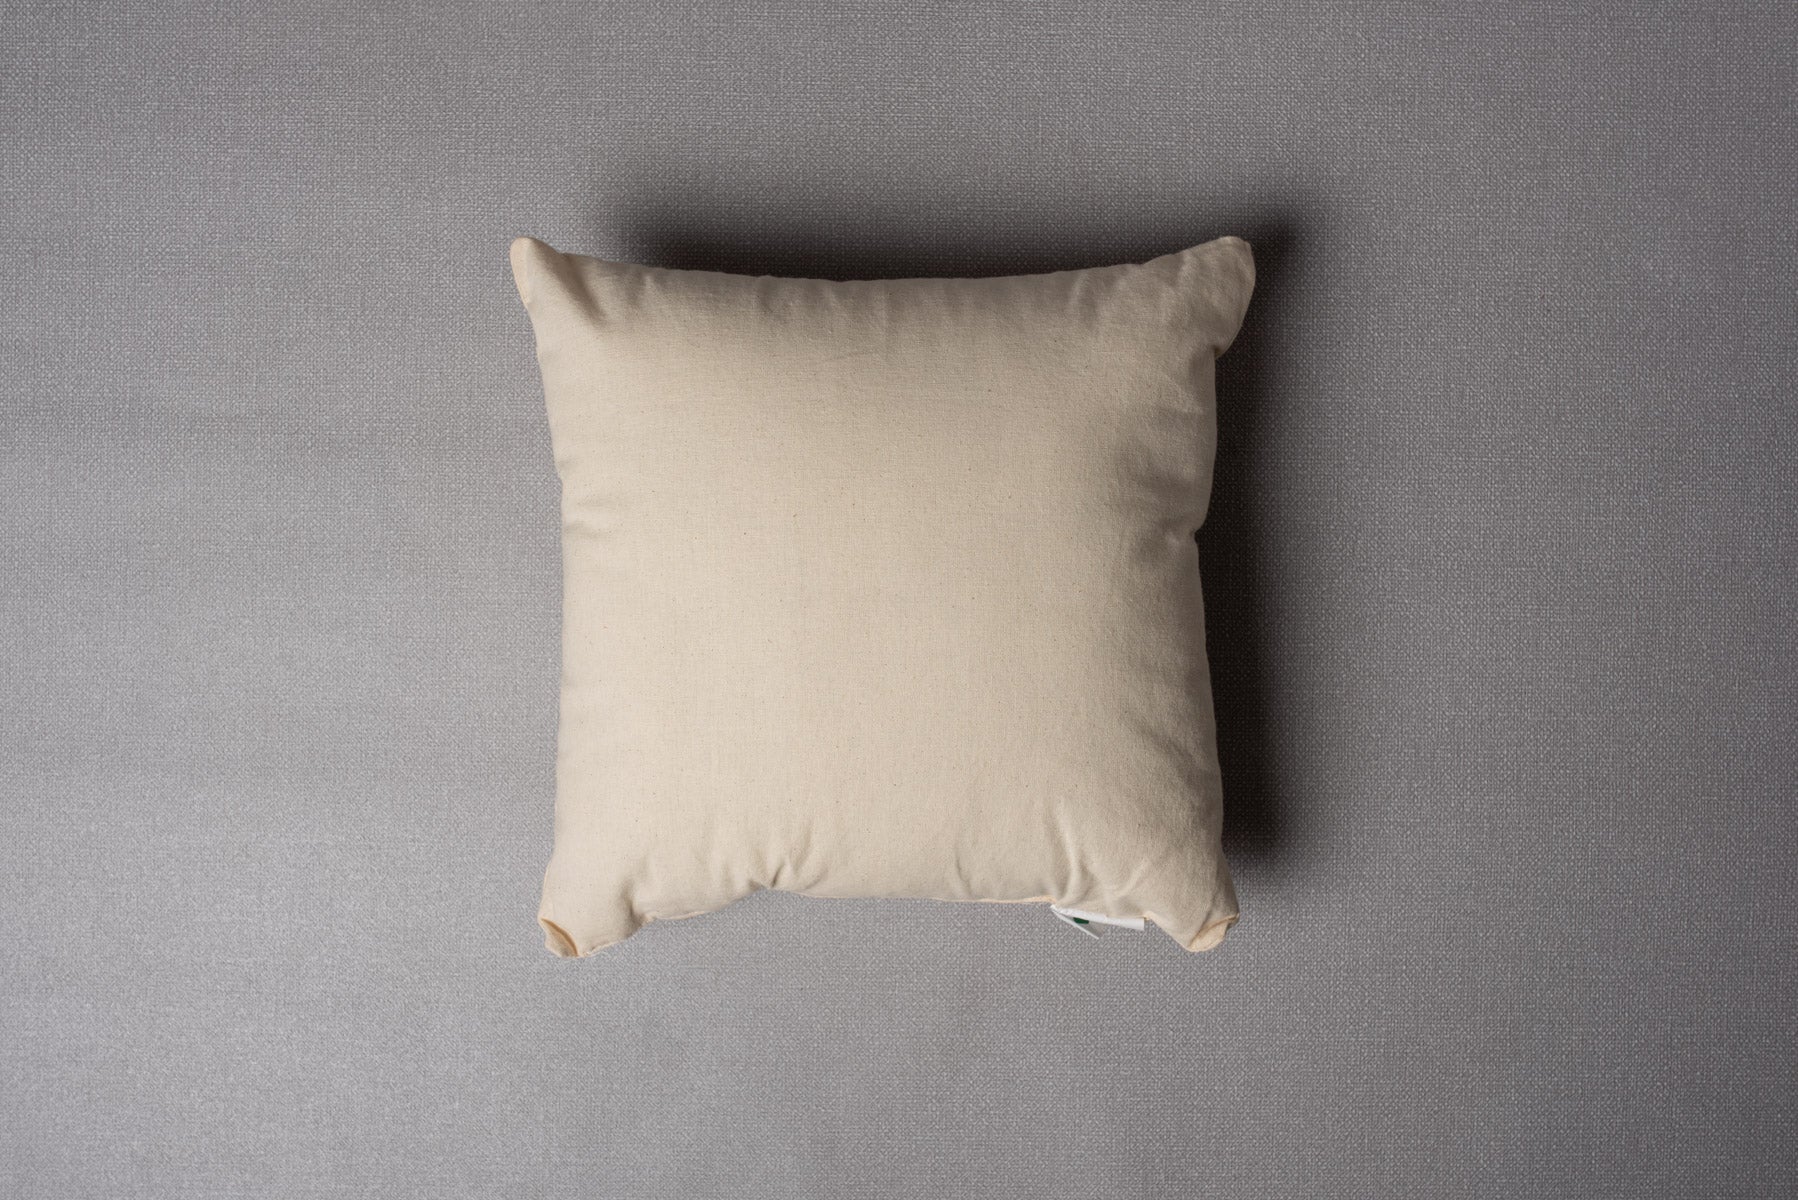 Cushion Filler with Man Made Fiber Filling and Cotton Cover - 12"